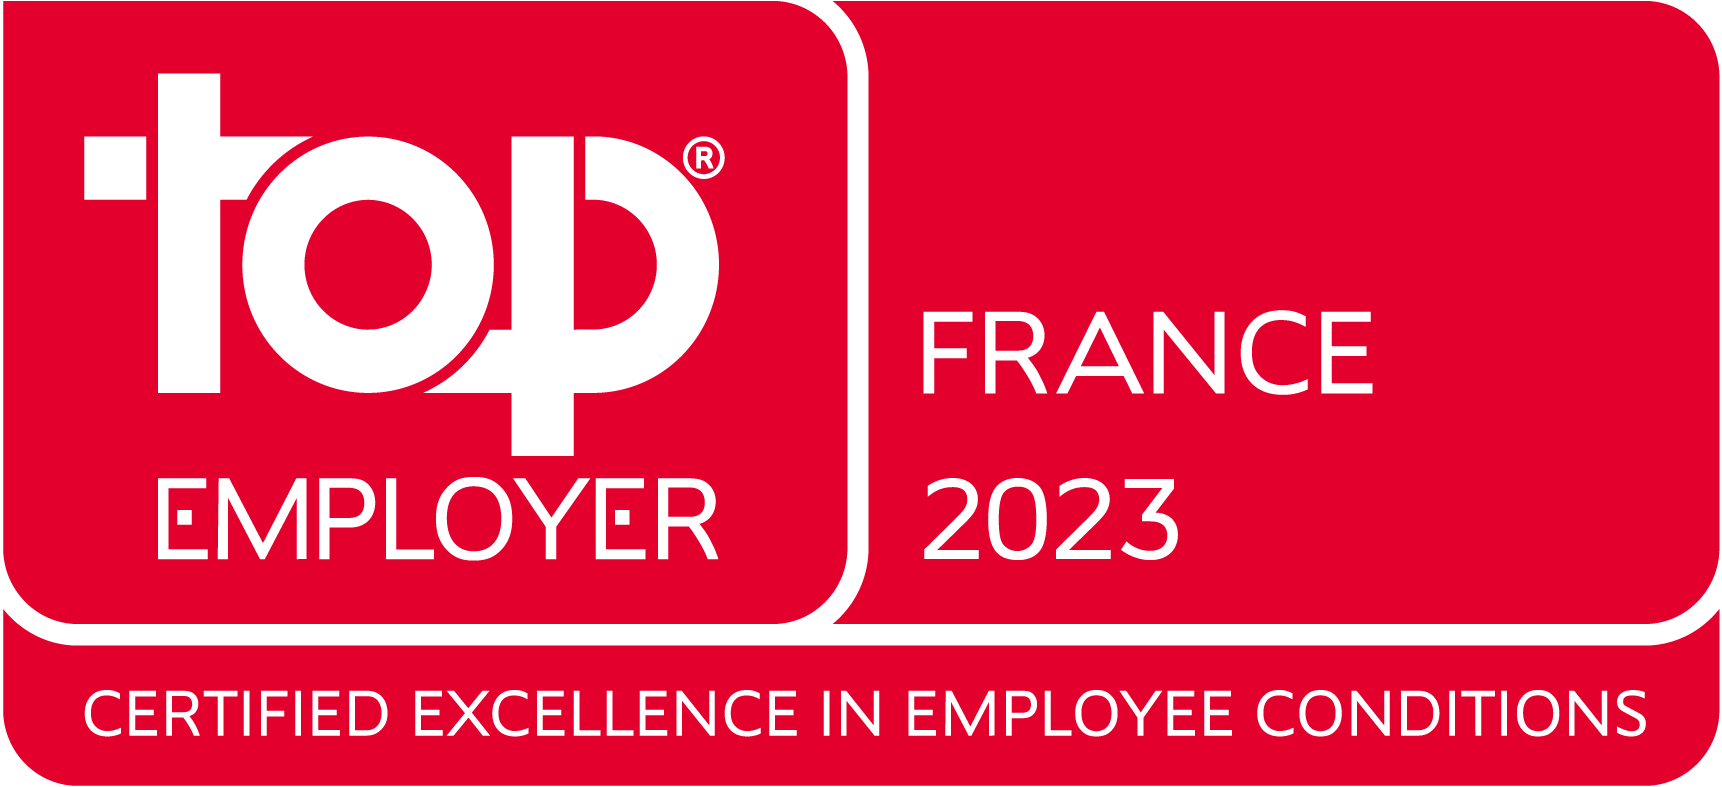 Top Employer France 2023